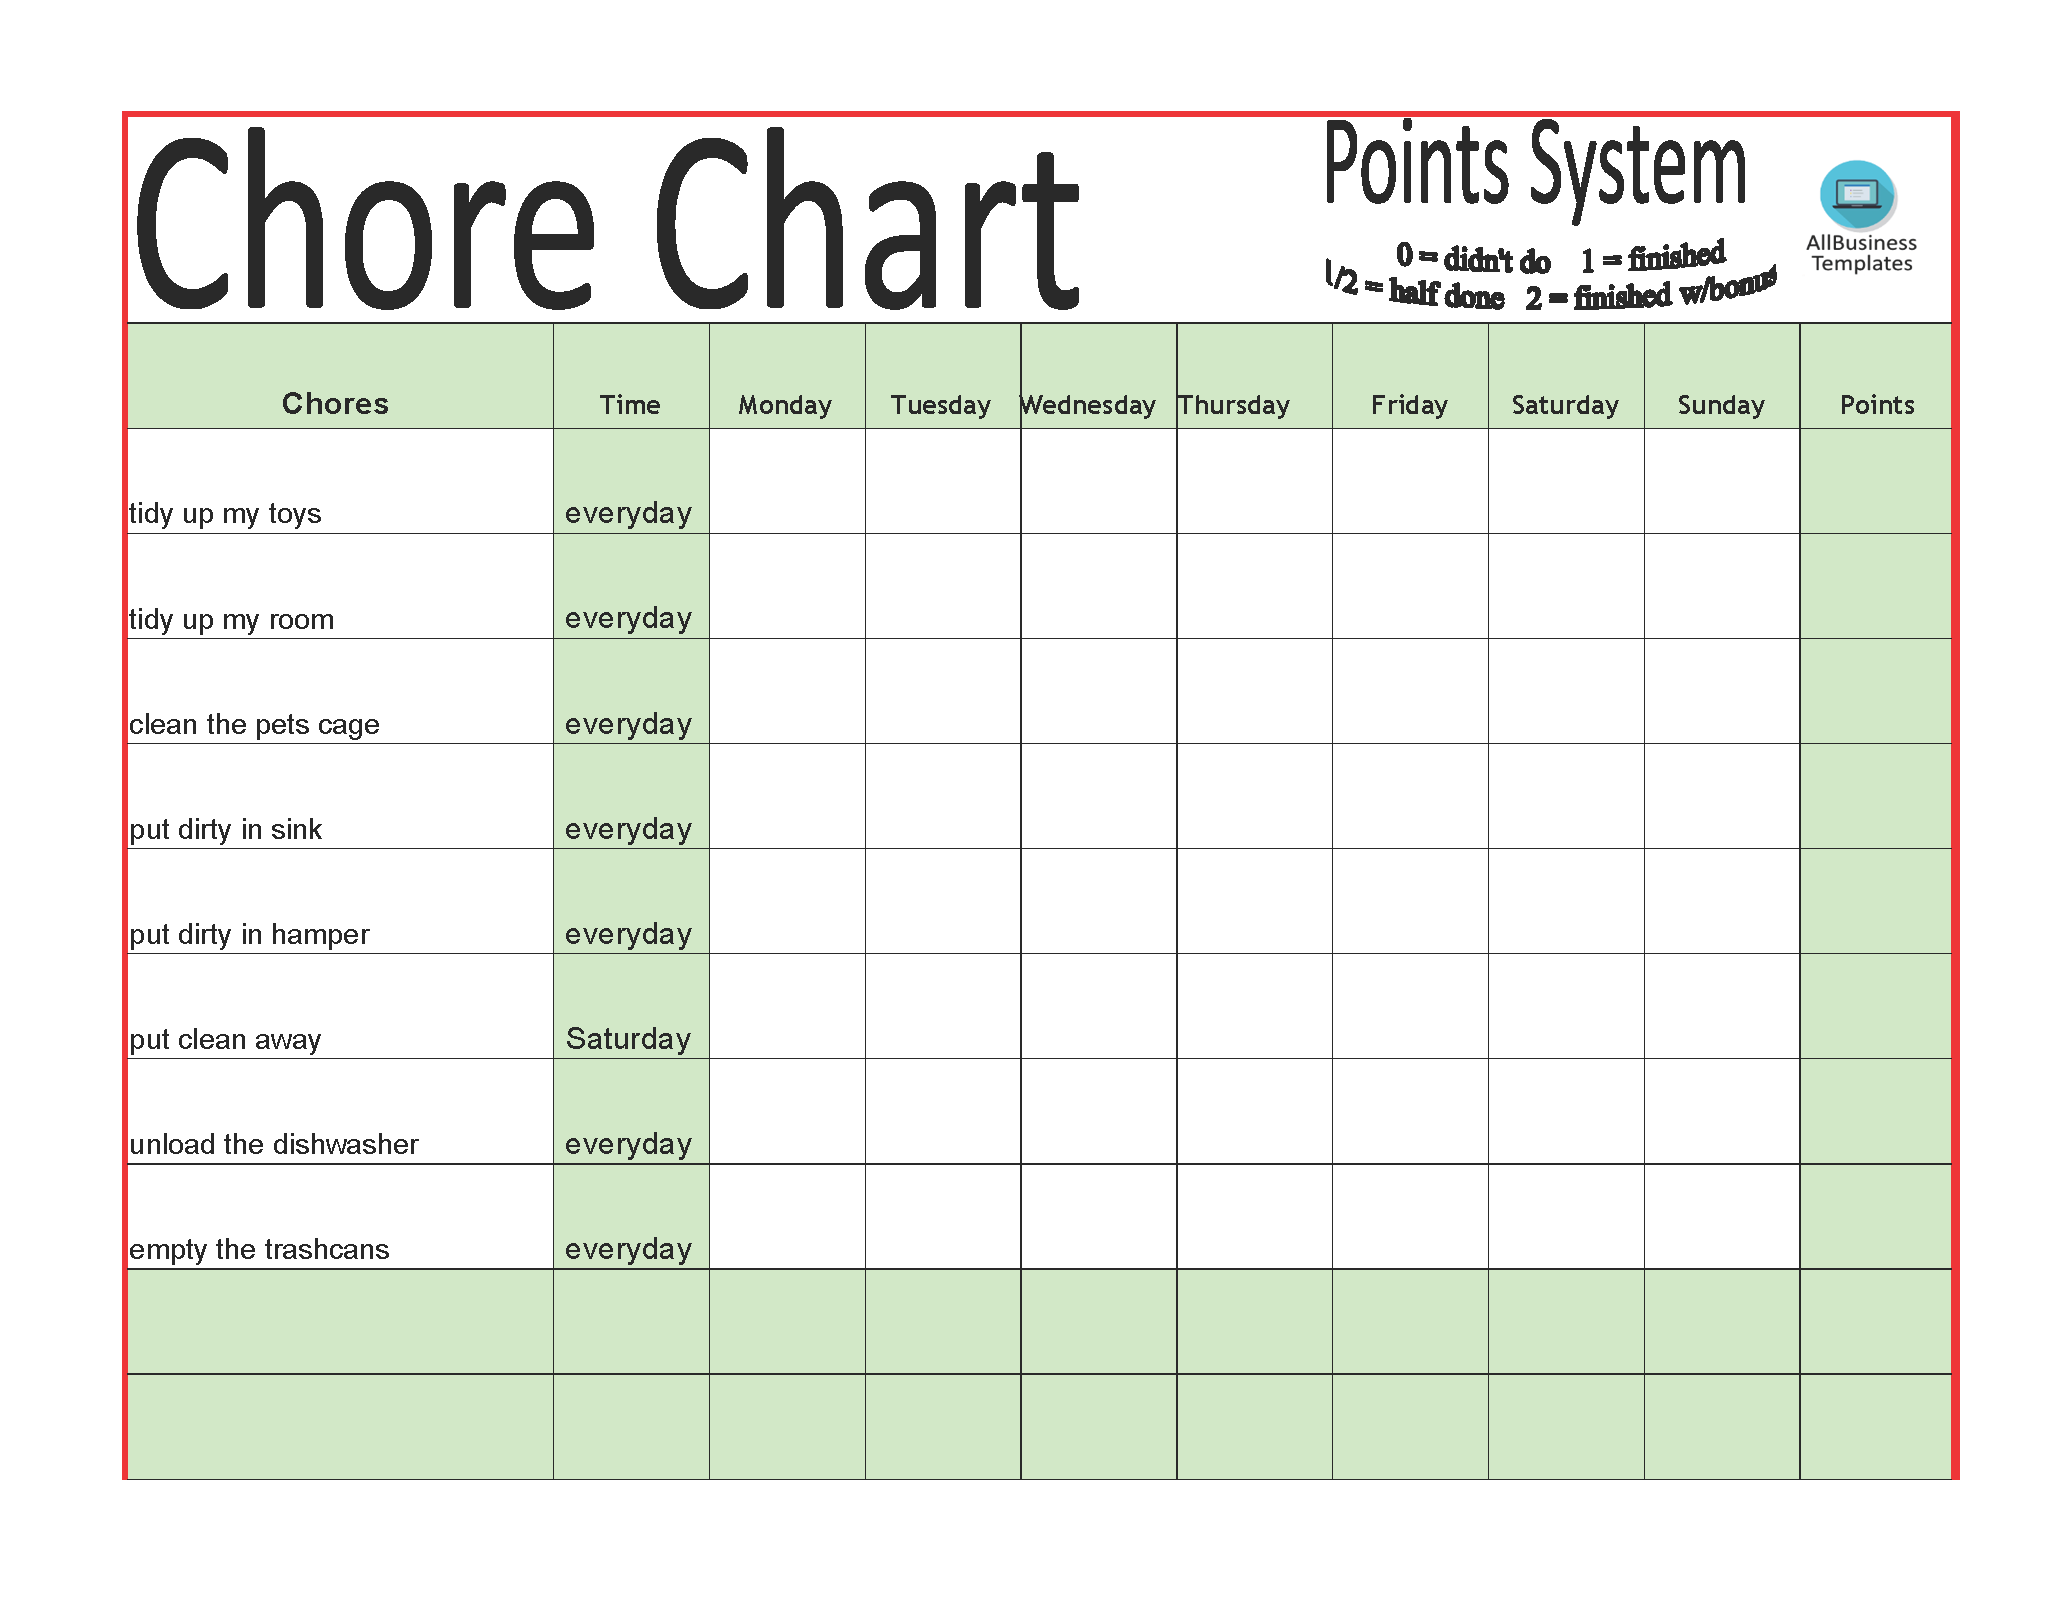 Chore chart Template in excel main image